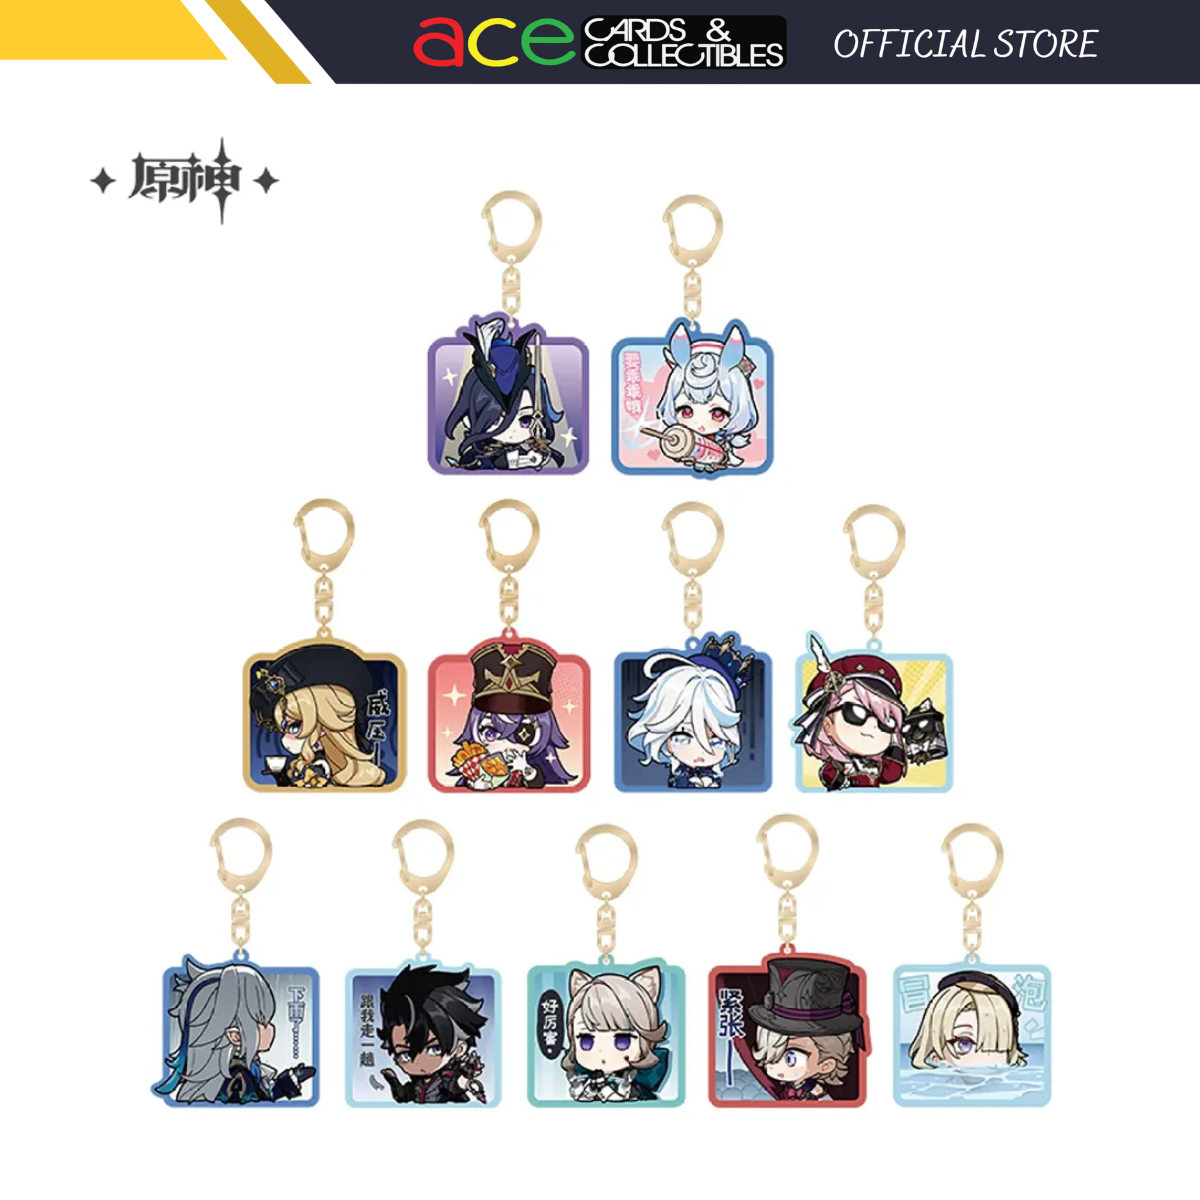 miHoYo Genshin Impact Chibi Fontaine Character Expression Sticker Keychain-Clorinde-miHoYo-Ace Cards & Collectibles